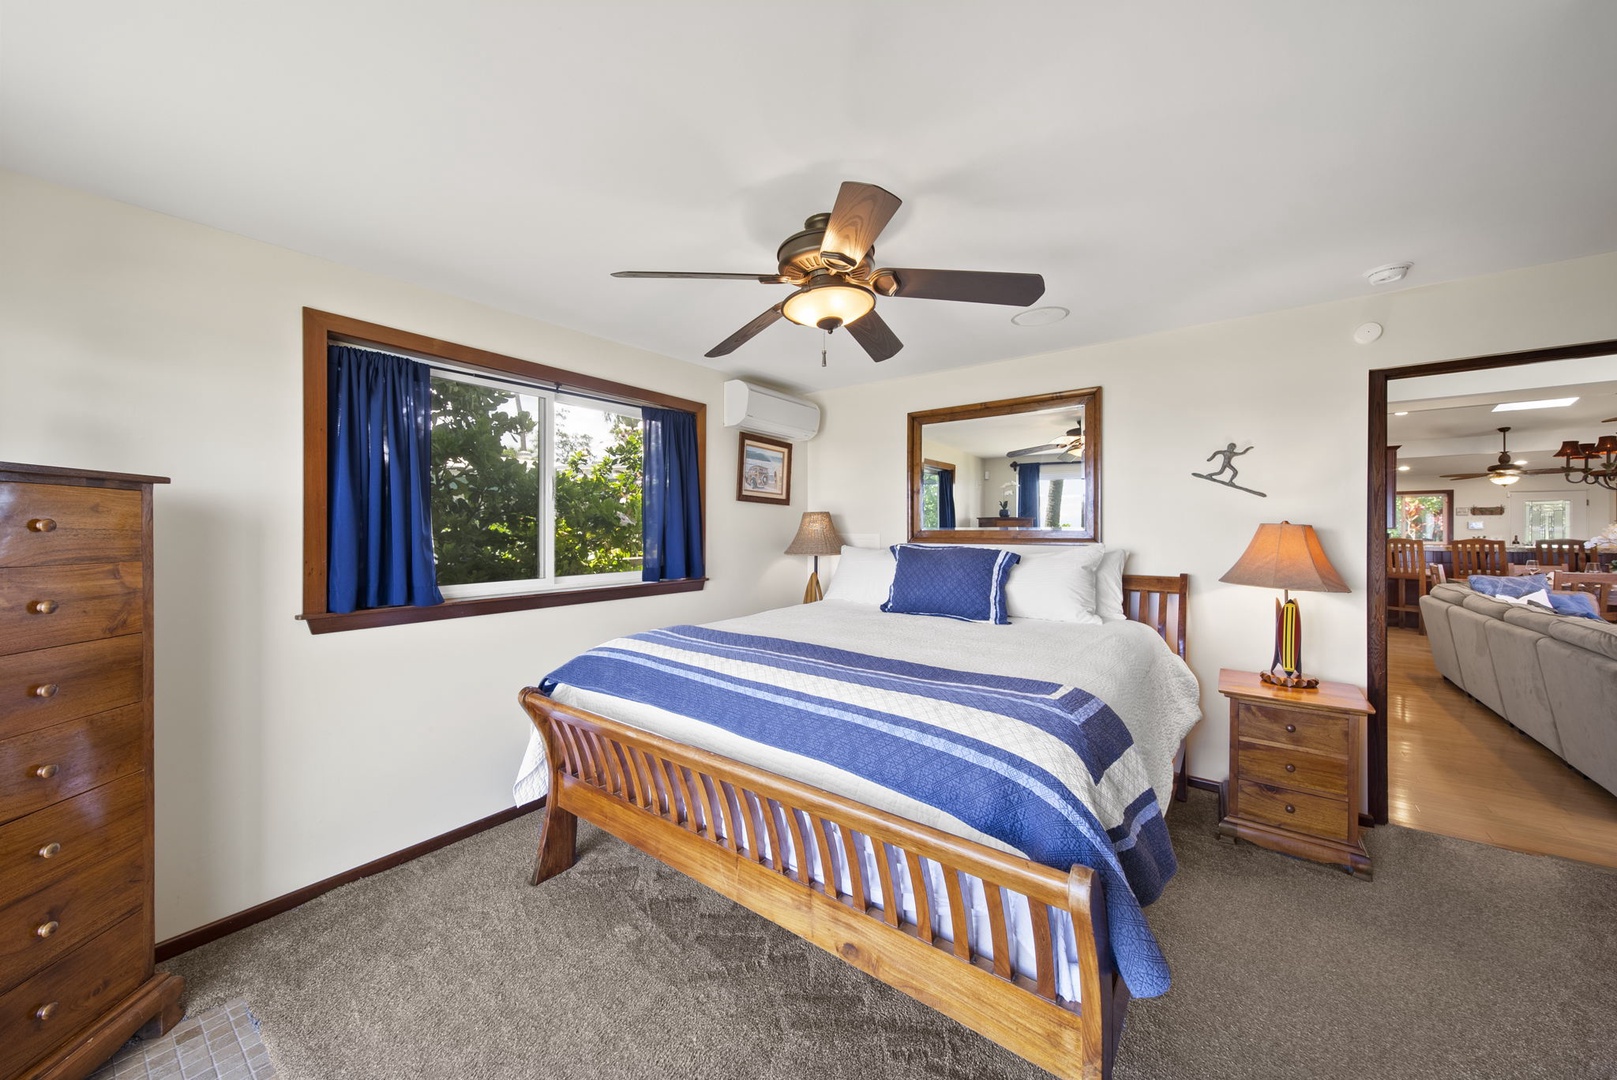 Waialua Vacation Rentals, Hale Oka Nunu - This bedroom is equipped with a queen bed